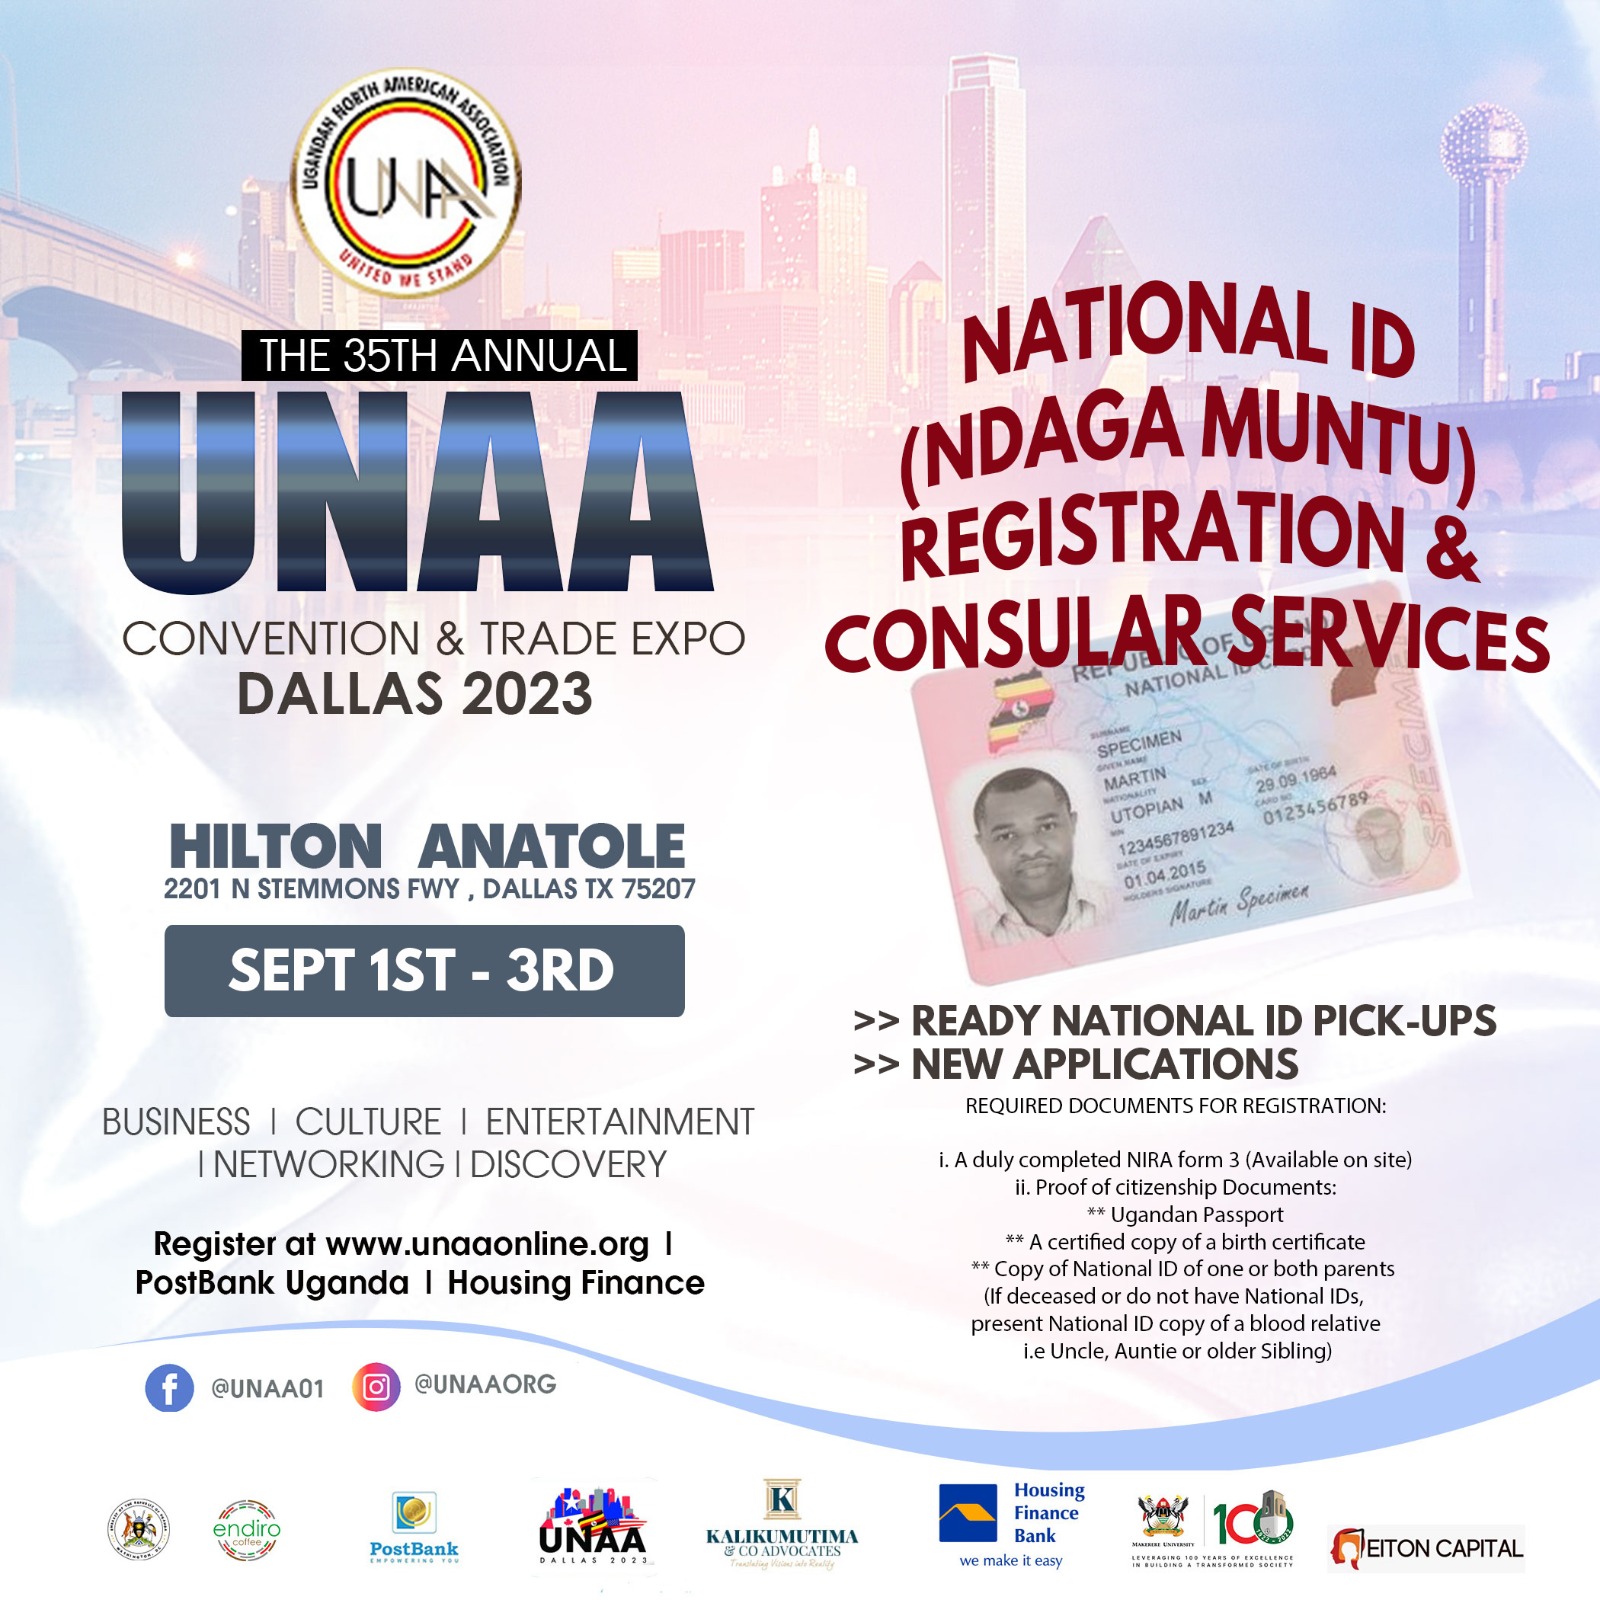 National ID Registration & Pickup At The UNAA Convention 2023